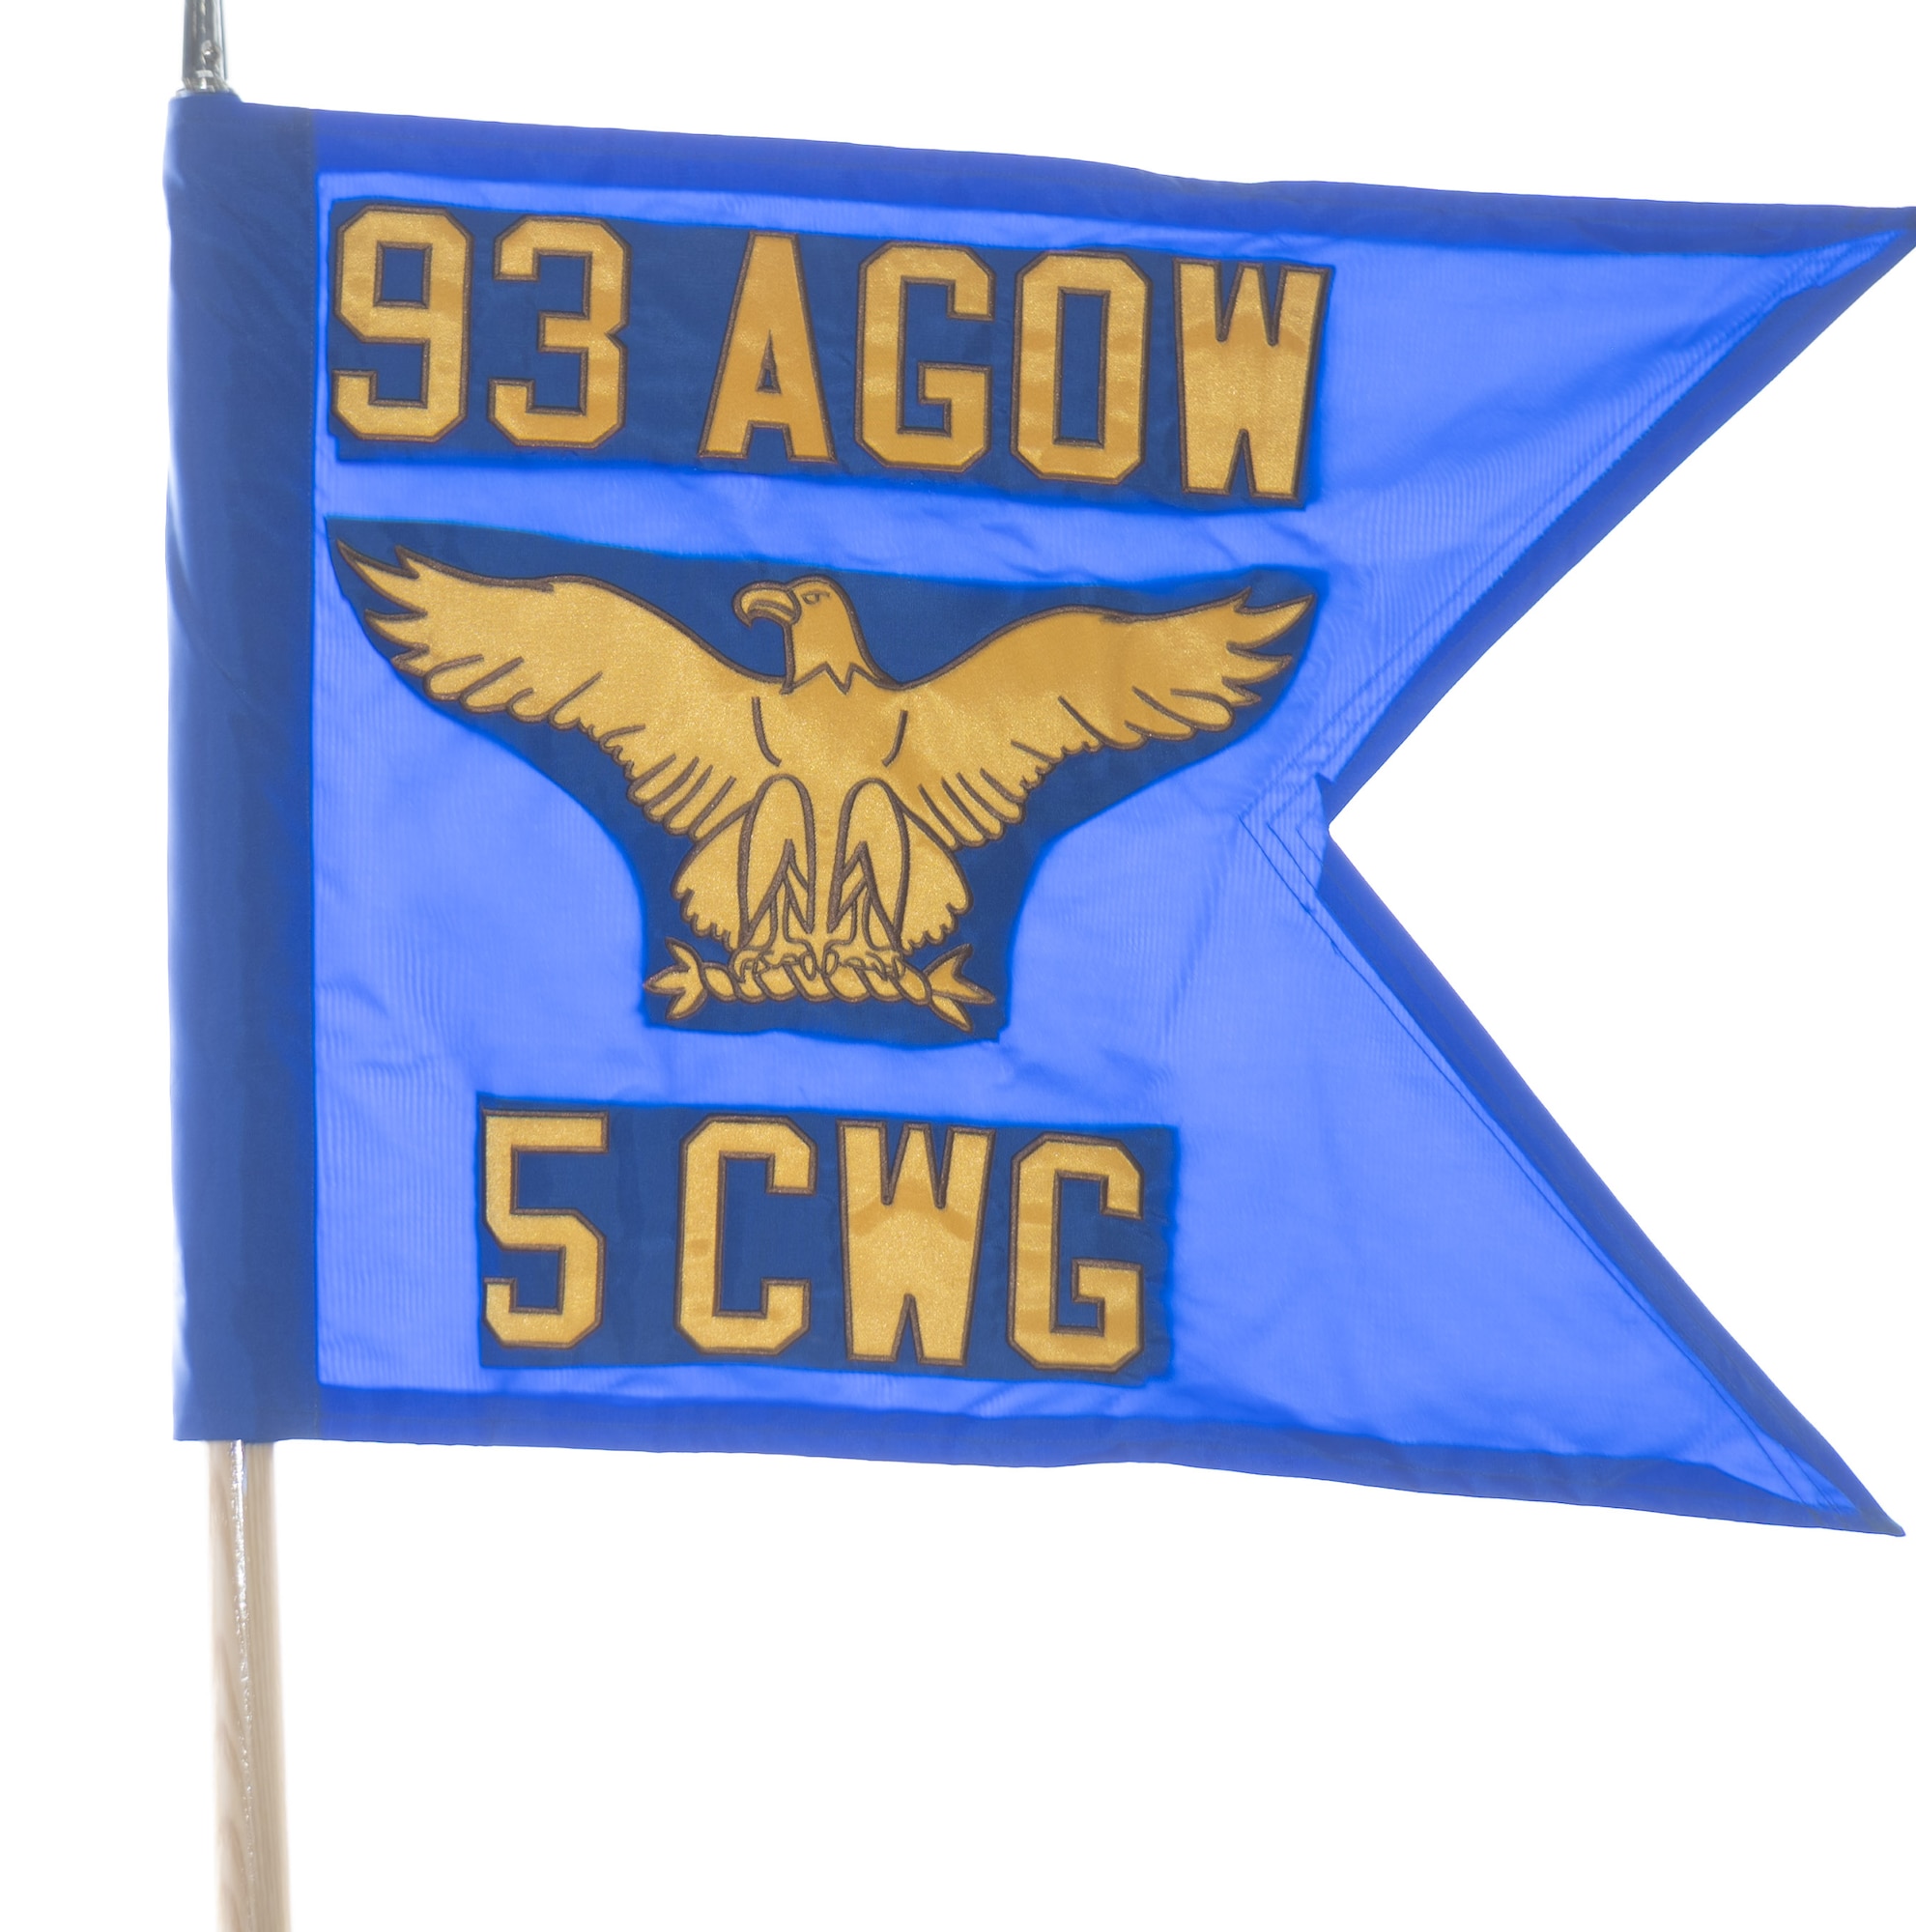 93 AGOW activates first-ever Combat Weather Group in DoD history